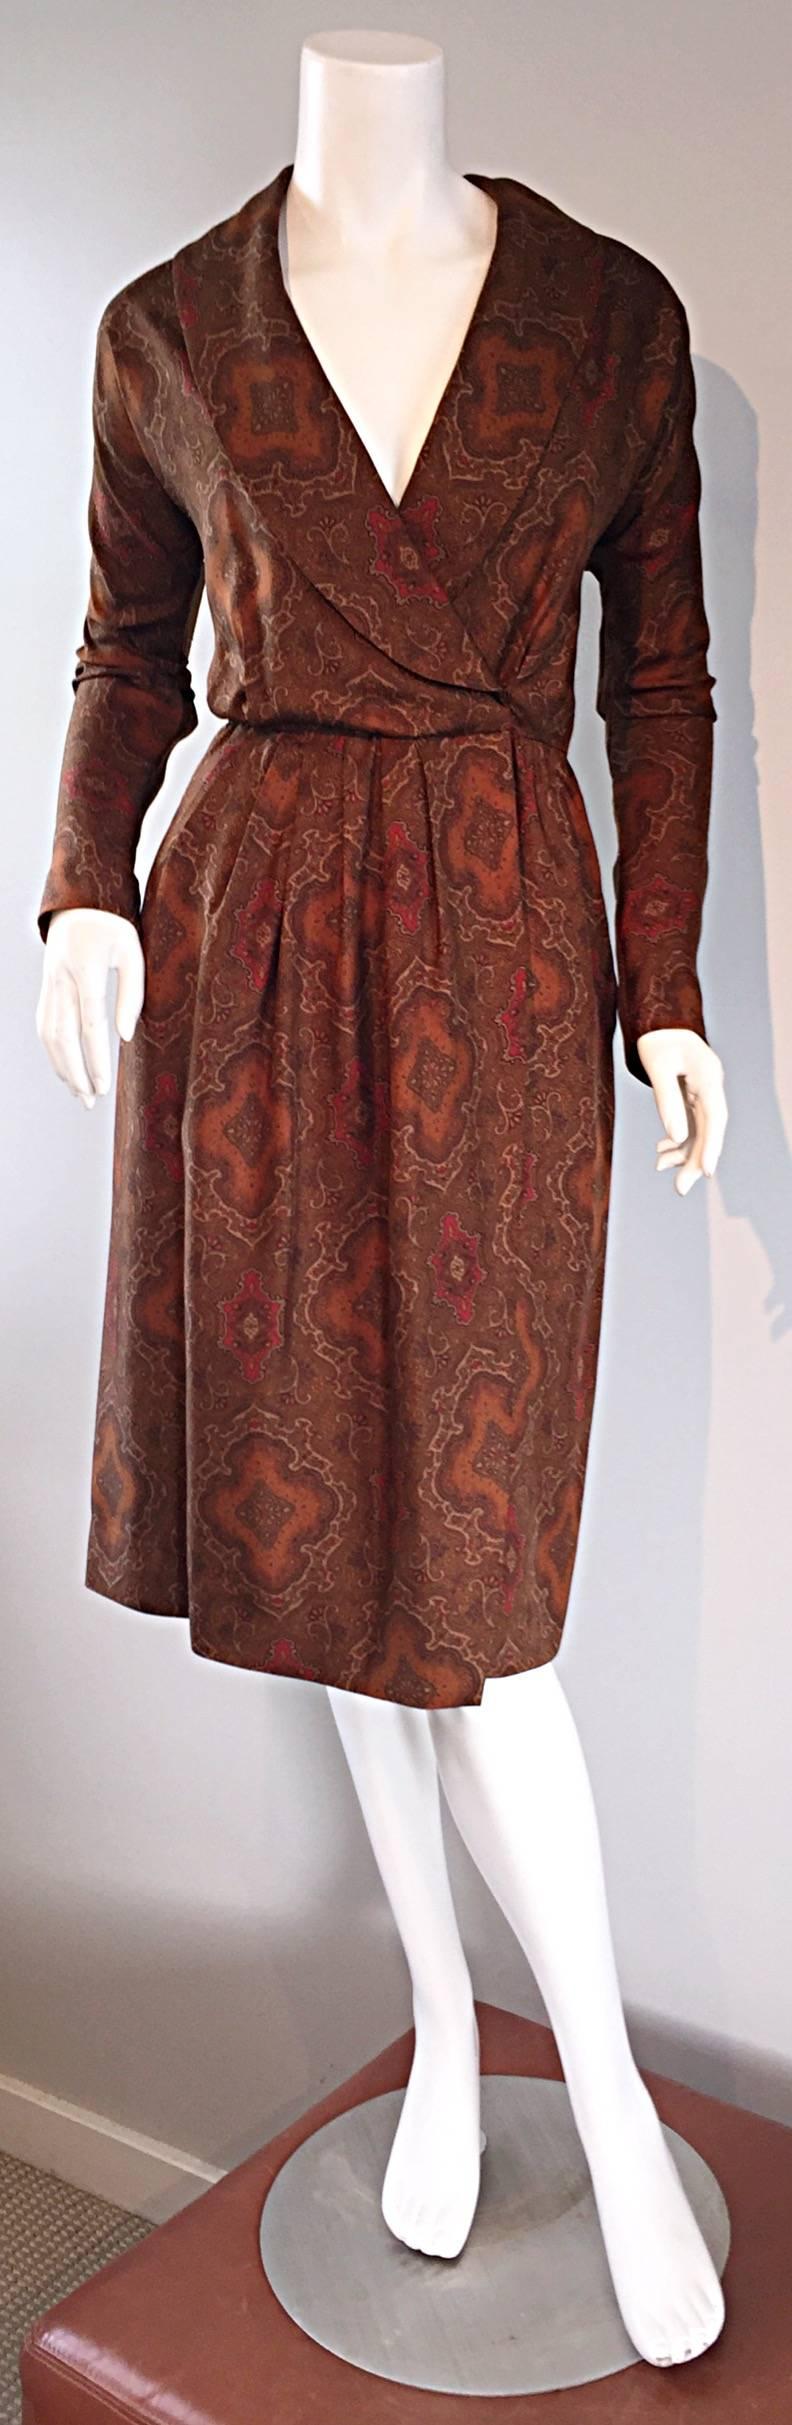 Striking vintage early 1990s CAROLYNE ROEHM wrap dress! Regal paisley print, on luxurious silk, in autumnal tones. Elegant shawl collar. Sleek long sleeves. Built in interior support at waist, to ensure everything stays put (and dress stays closed).